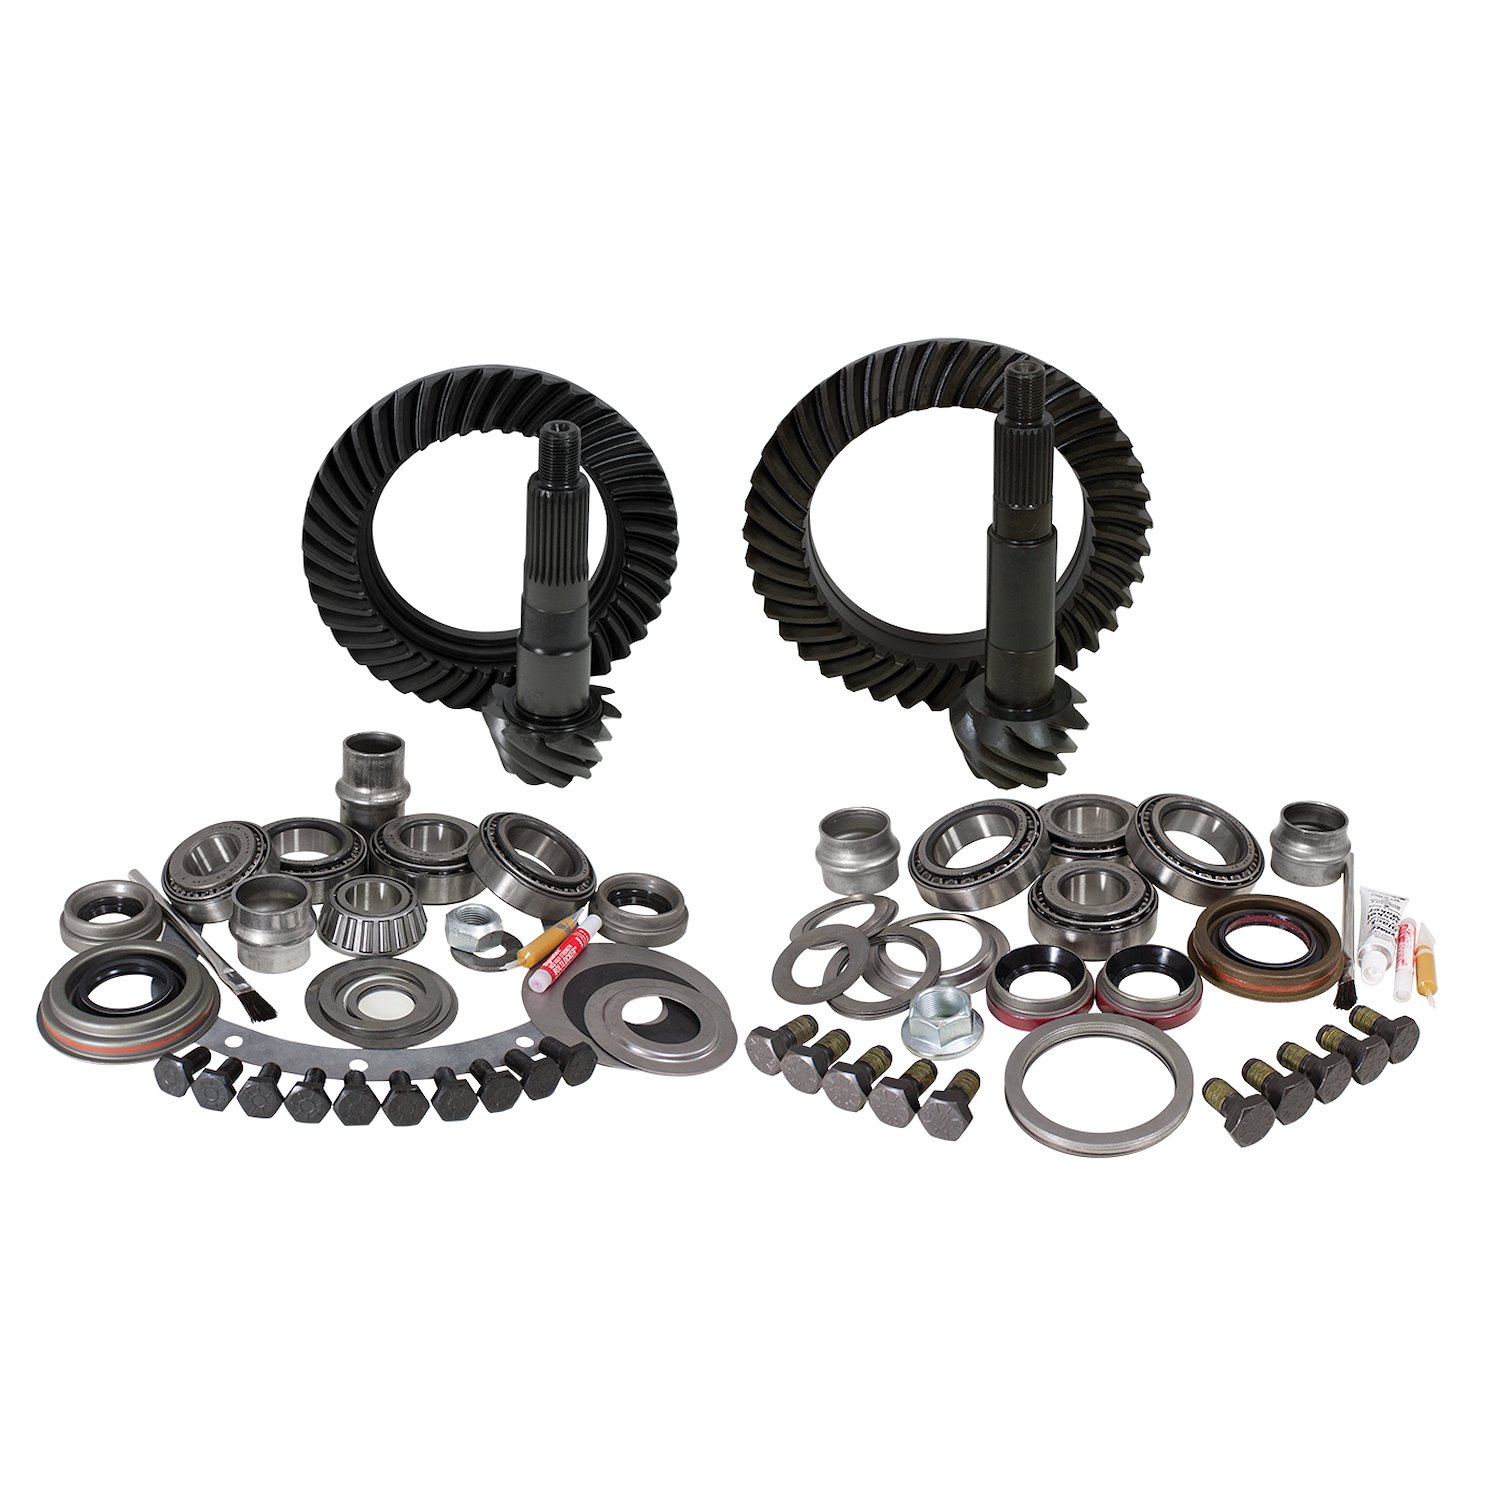 USA Standard ZGK014 Gear & Install Kit Package, For Non-Rubicon Jeep Jk, 5.13 Ratio